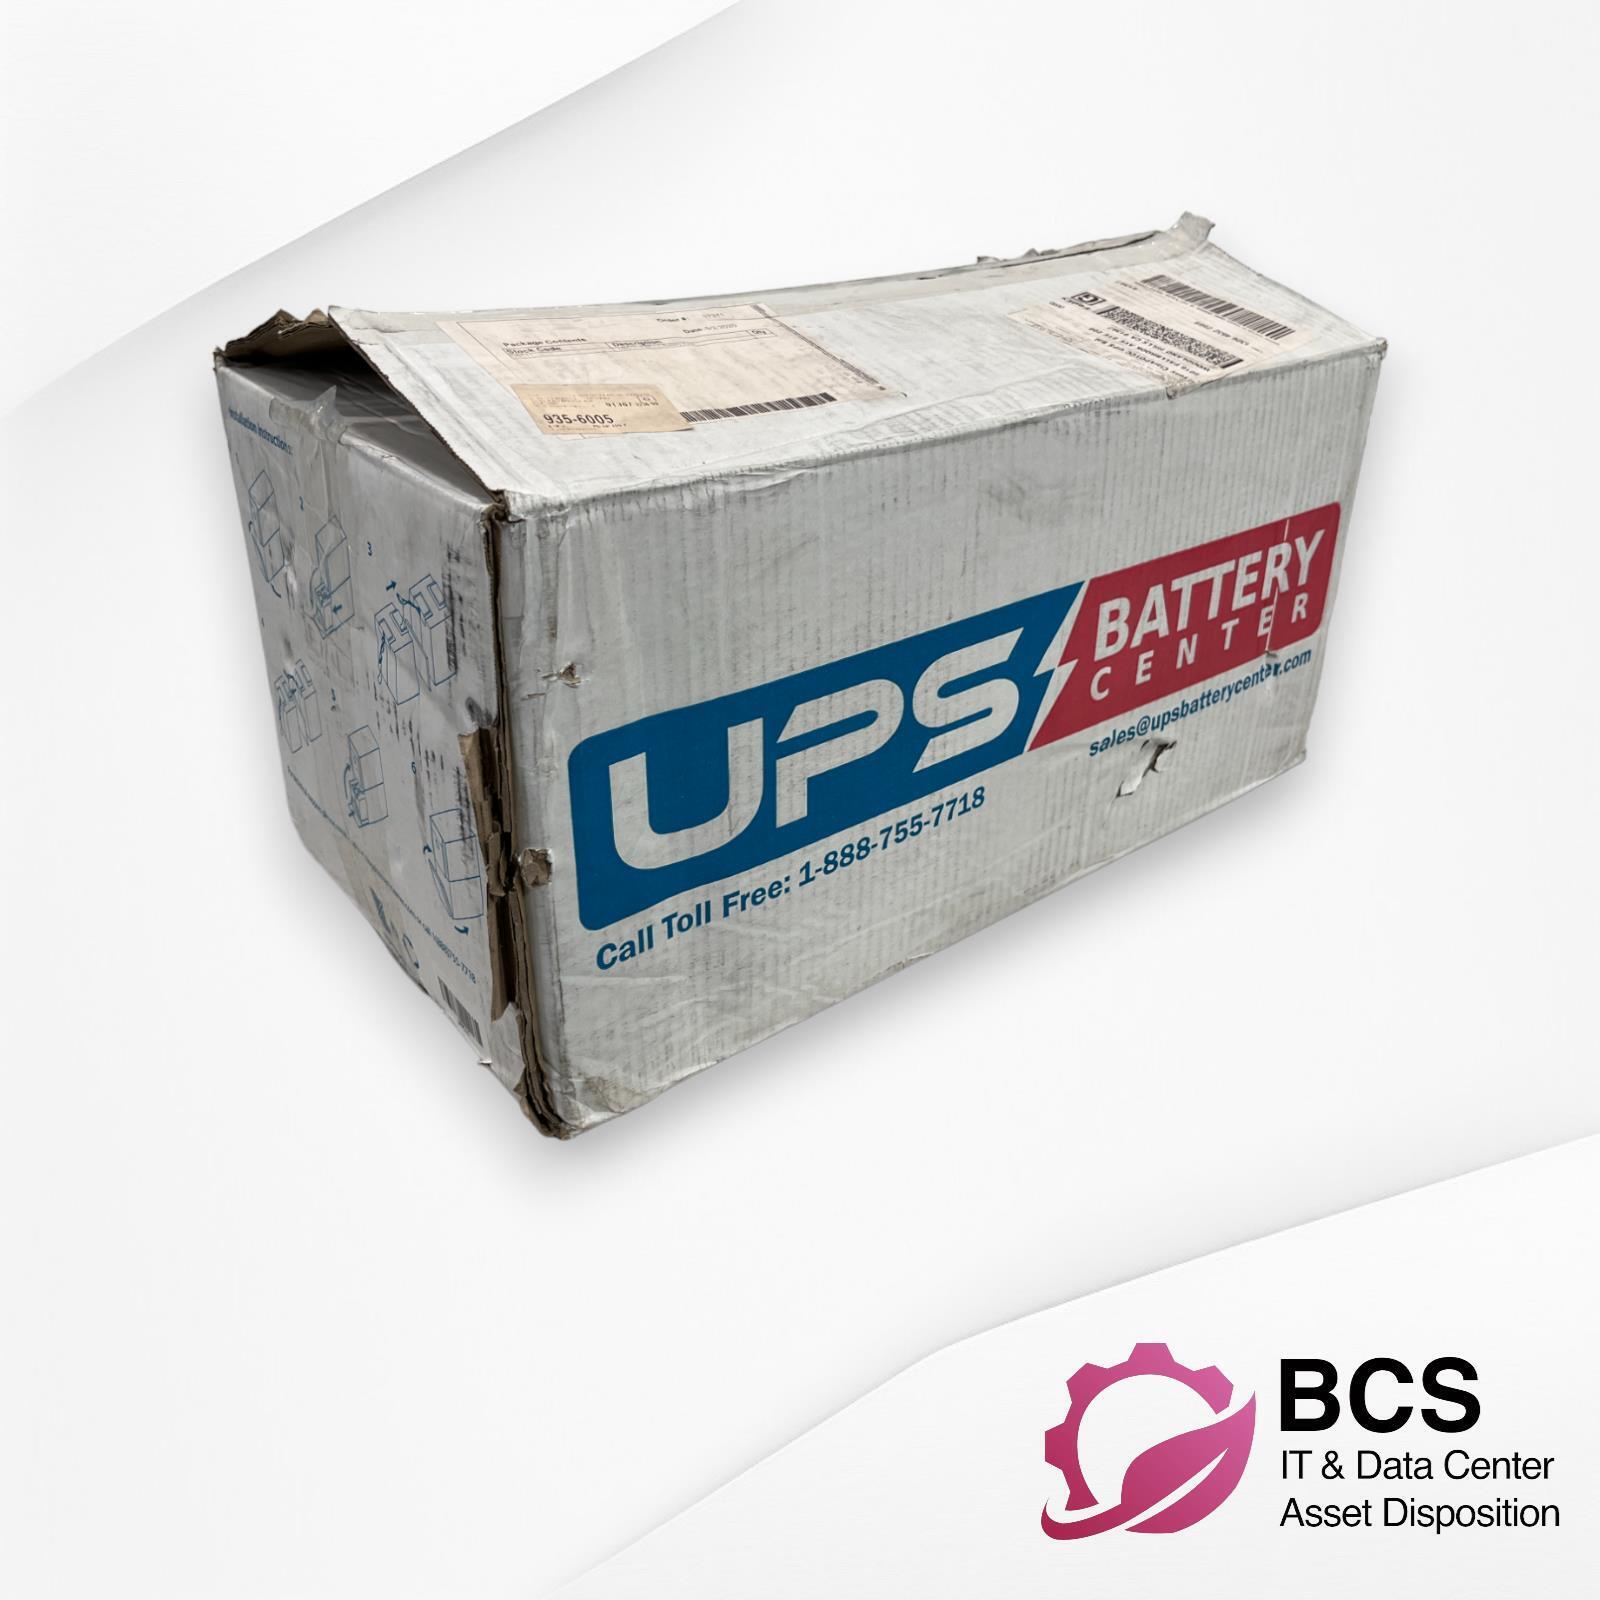 LOT OF 2 UPS BATTERY CENTER UBC11/UBC11 Replacement Battery